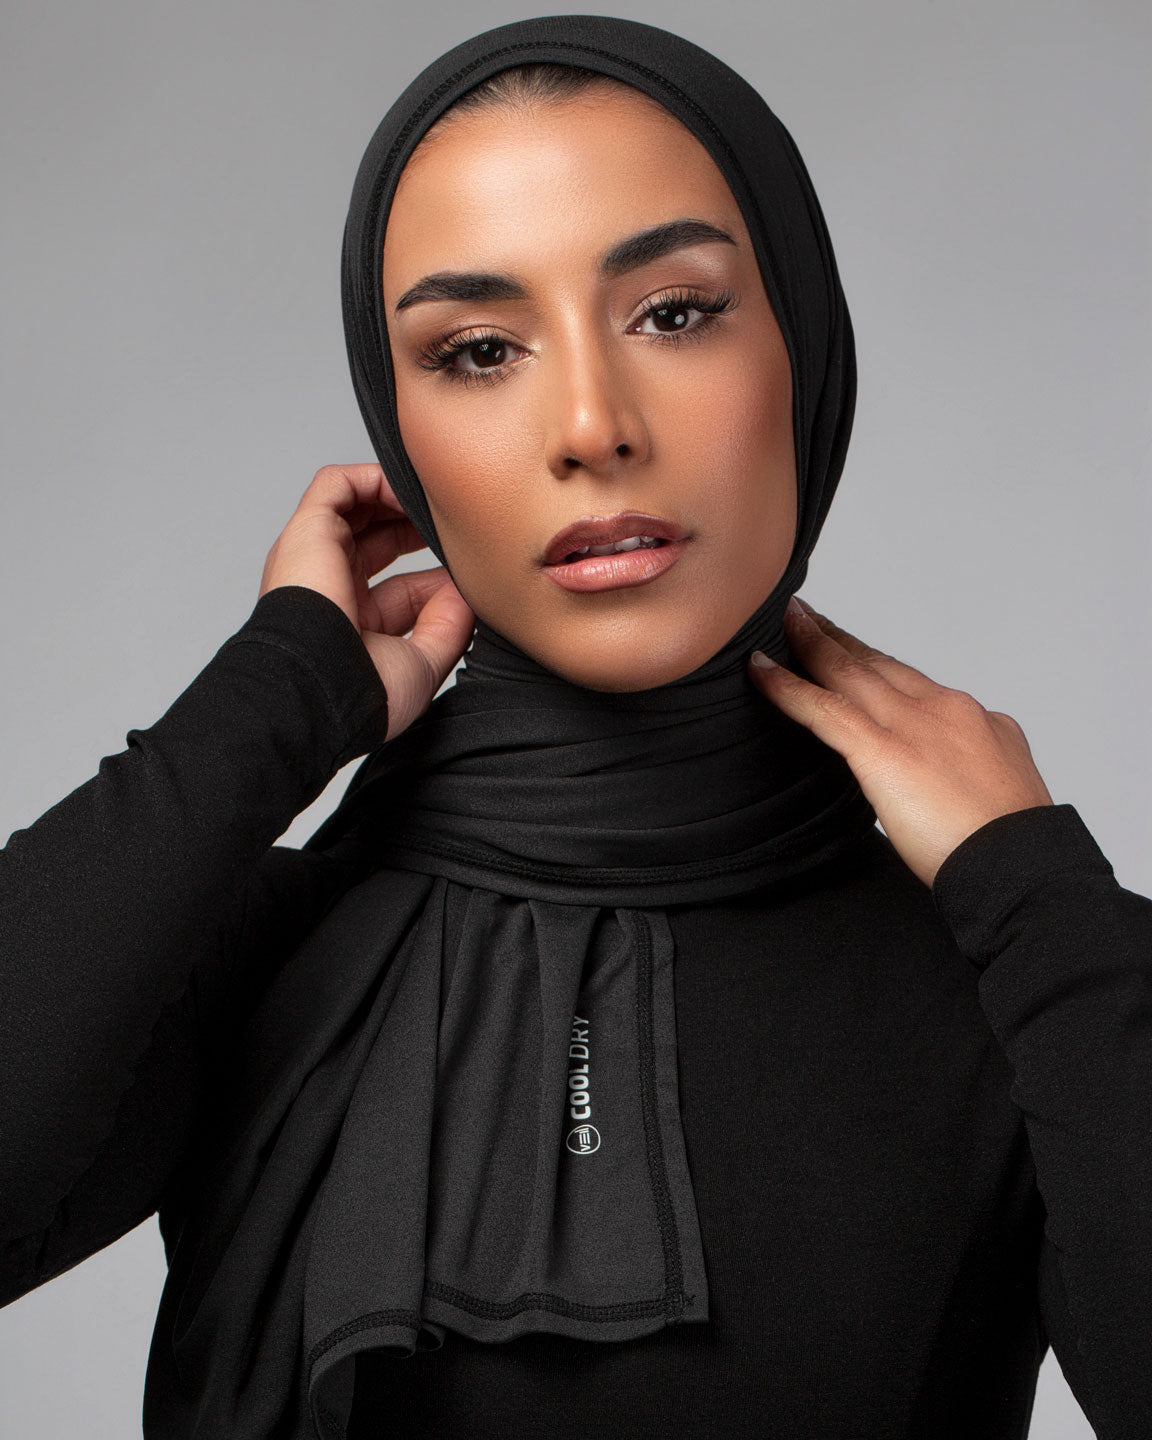 Cool Dry Shawl 2.0 in black by Veil Garments. Sports hijab collection.